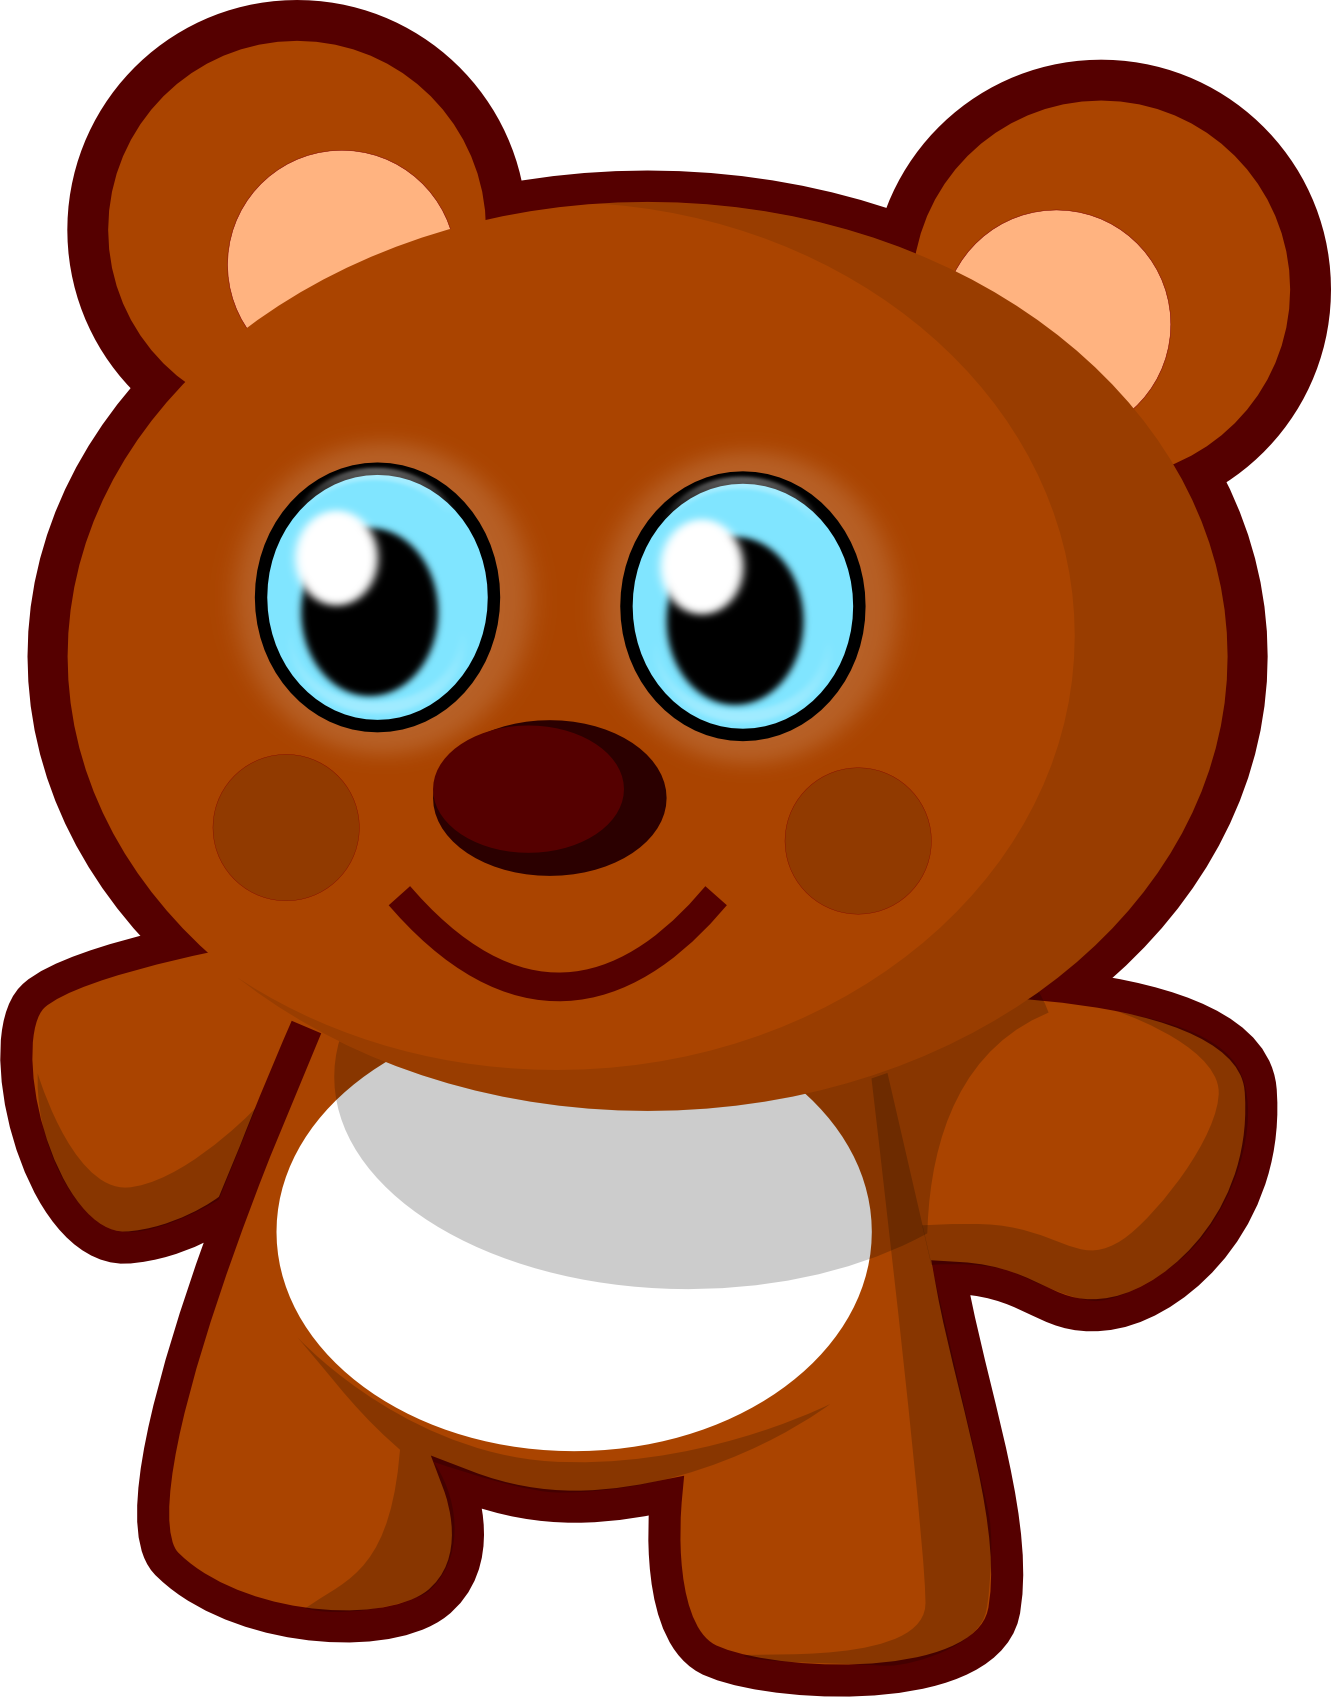 Brown Bear Brown Bear What Do You See Clipart - ClipArt Best